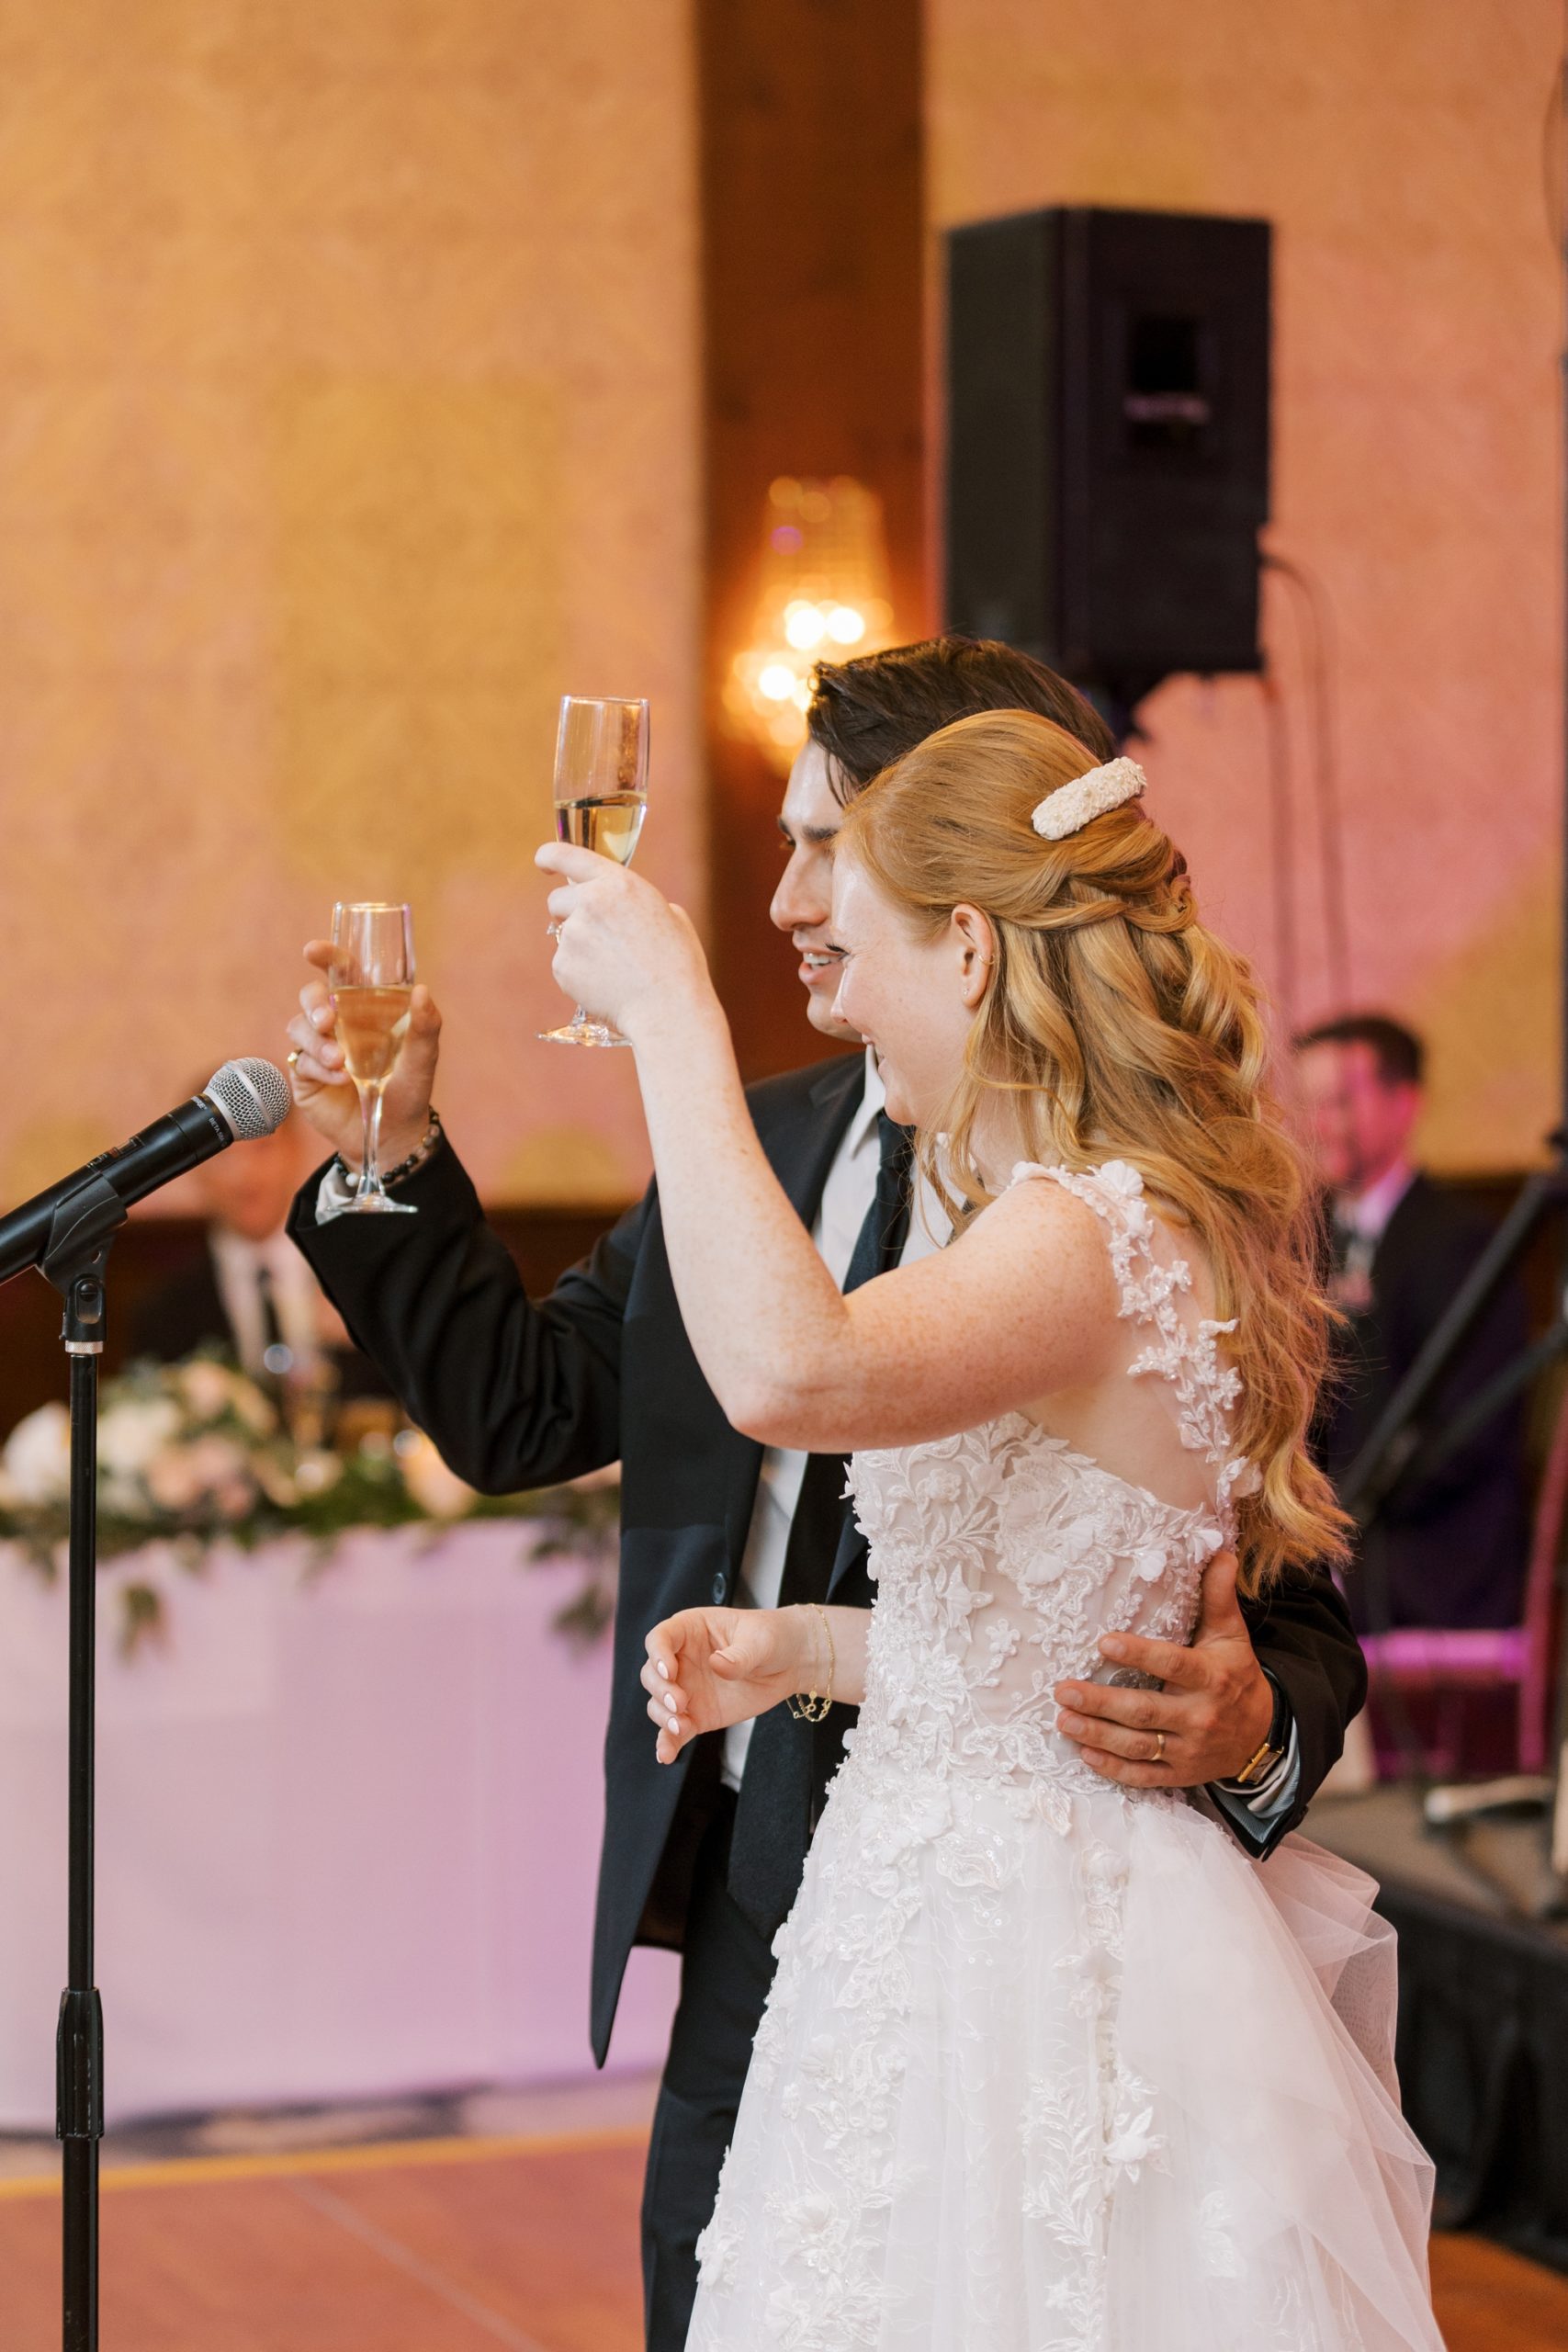 The bride and groom gave a toast at their wedding at The Drake Oak Brook